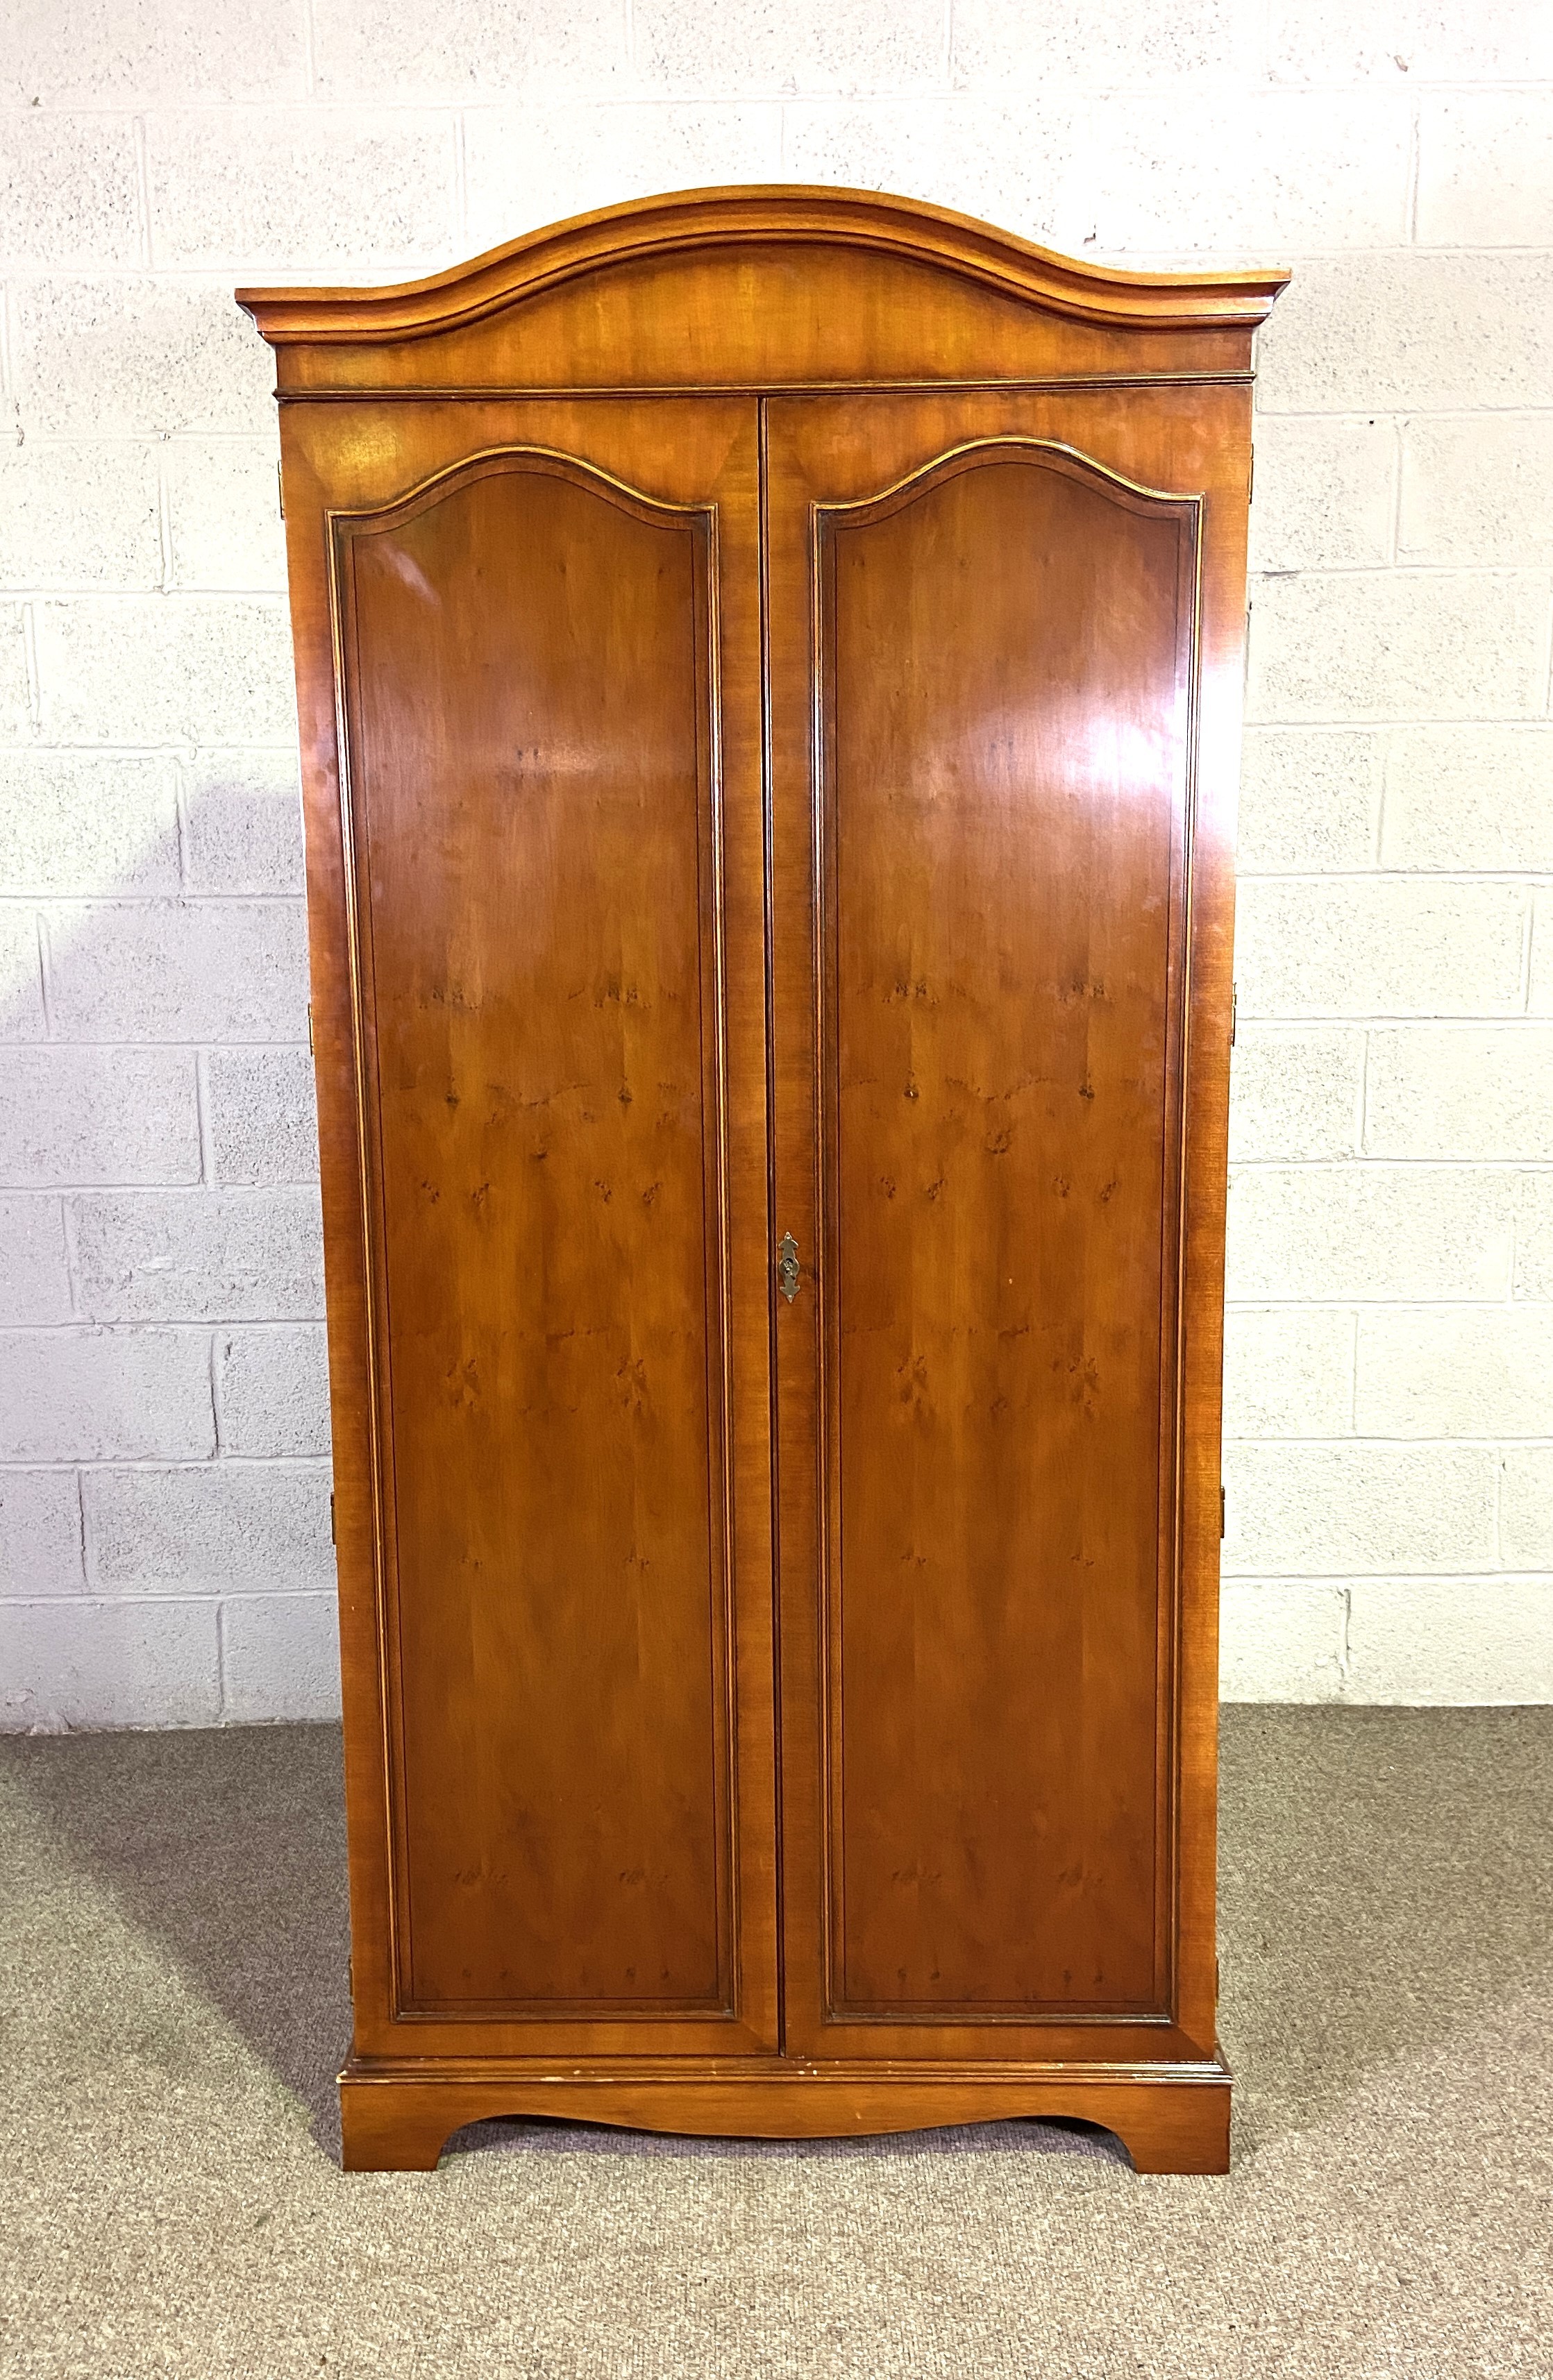 A Georgian reproduction two door wardrobe, with arched top